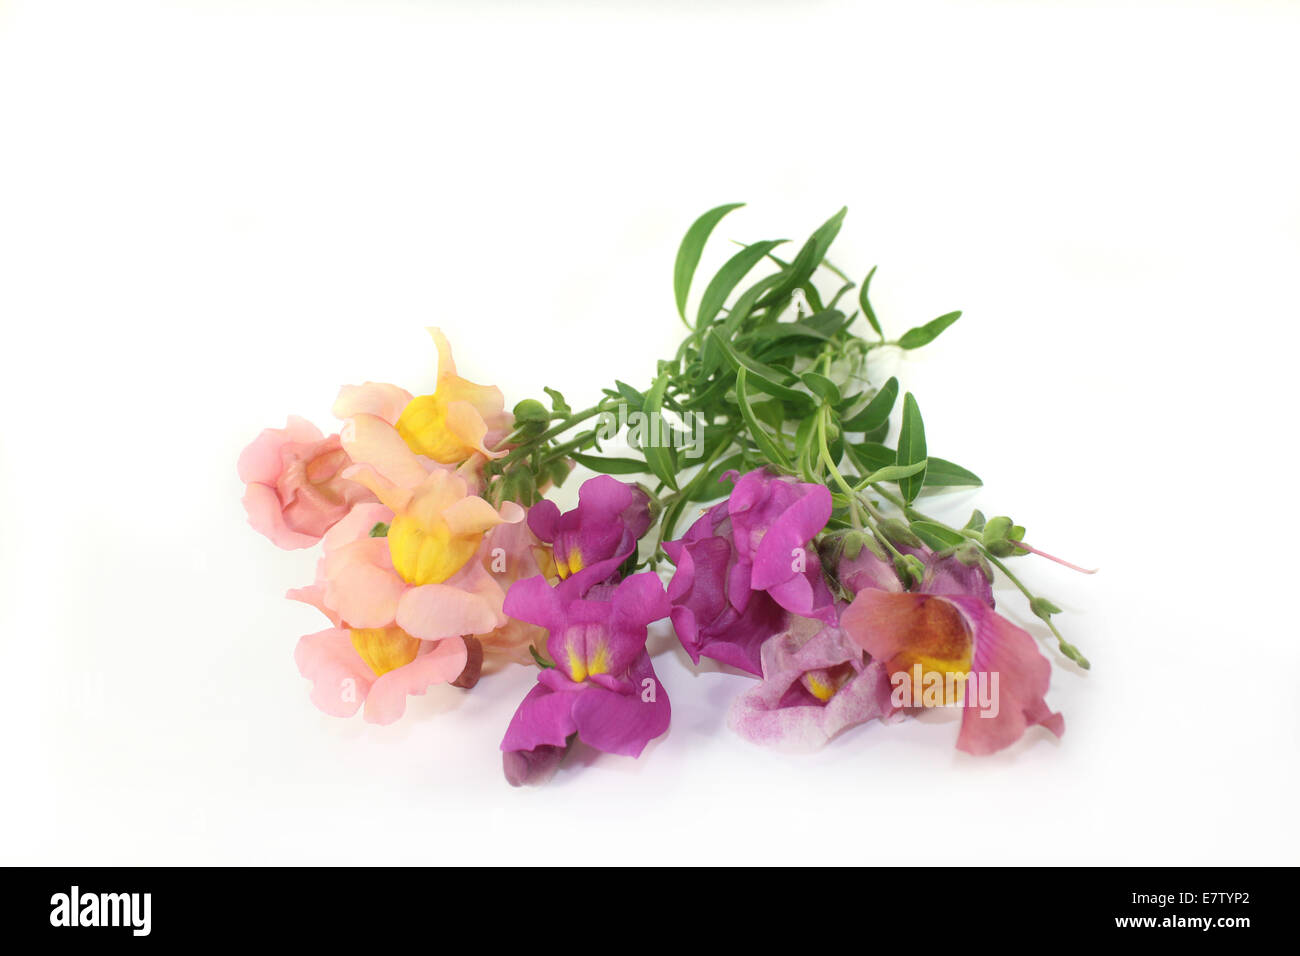 colorful snapdragon flowers in front of white background Stock Photo